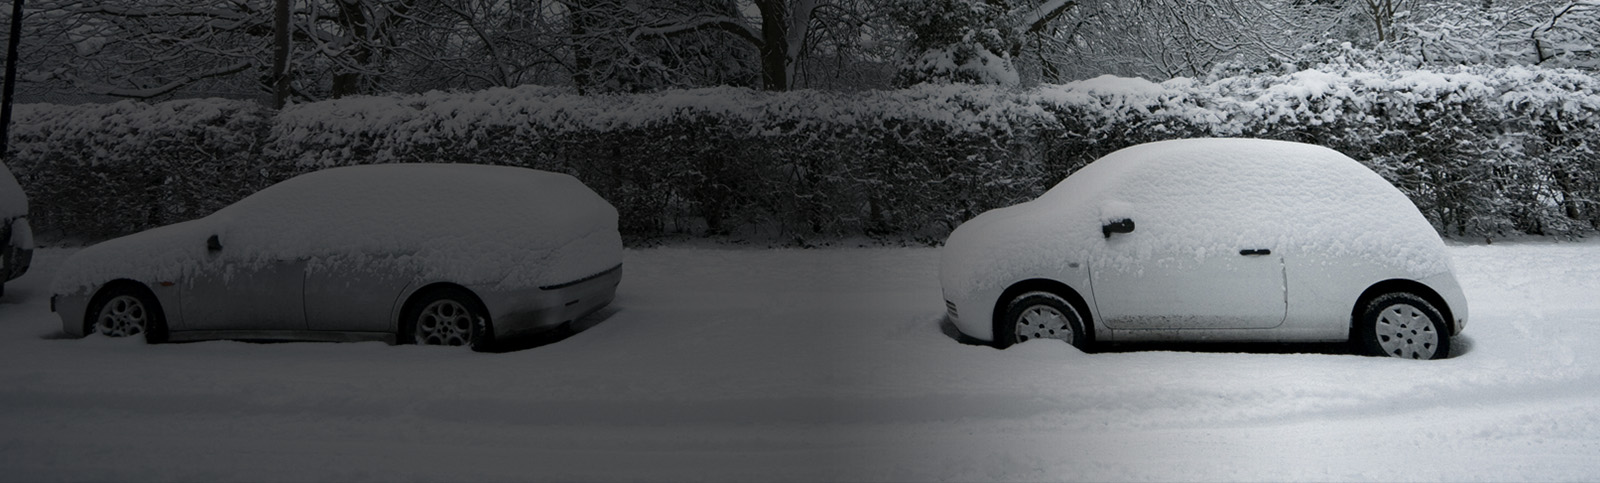 Two cars covered in snow during winter storm Uri in Texas 